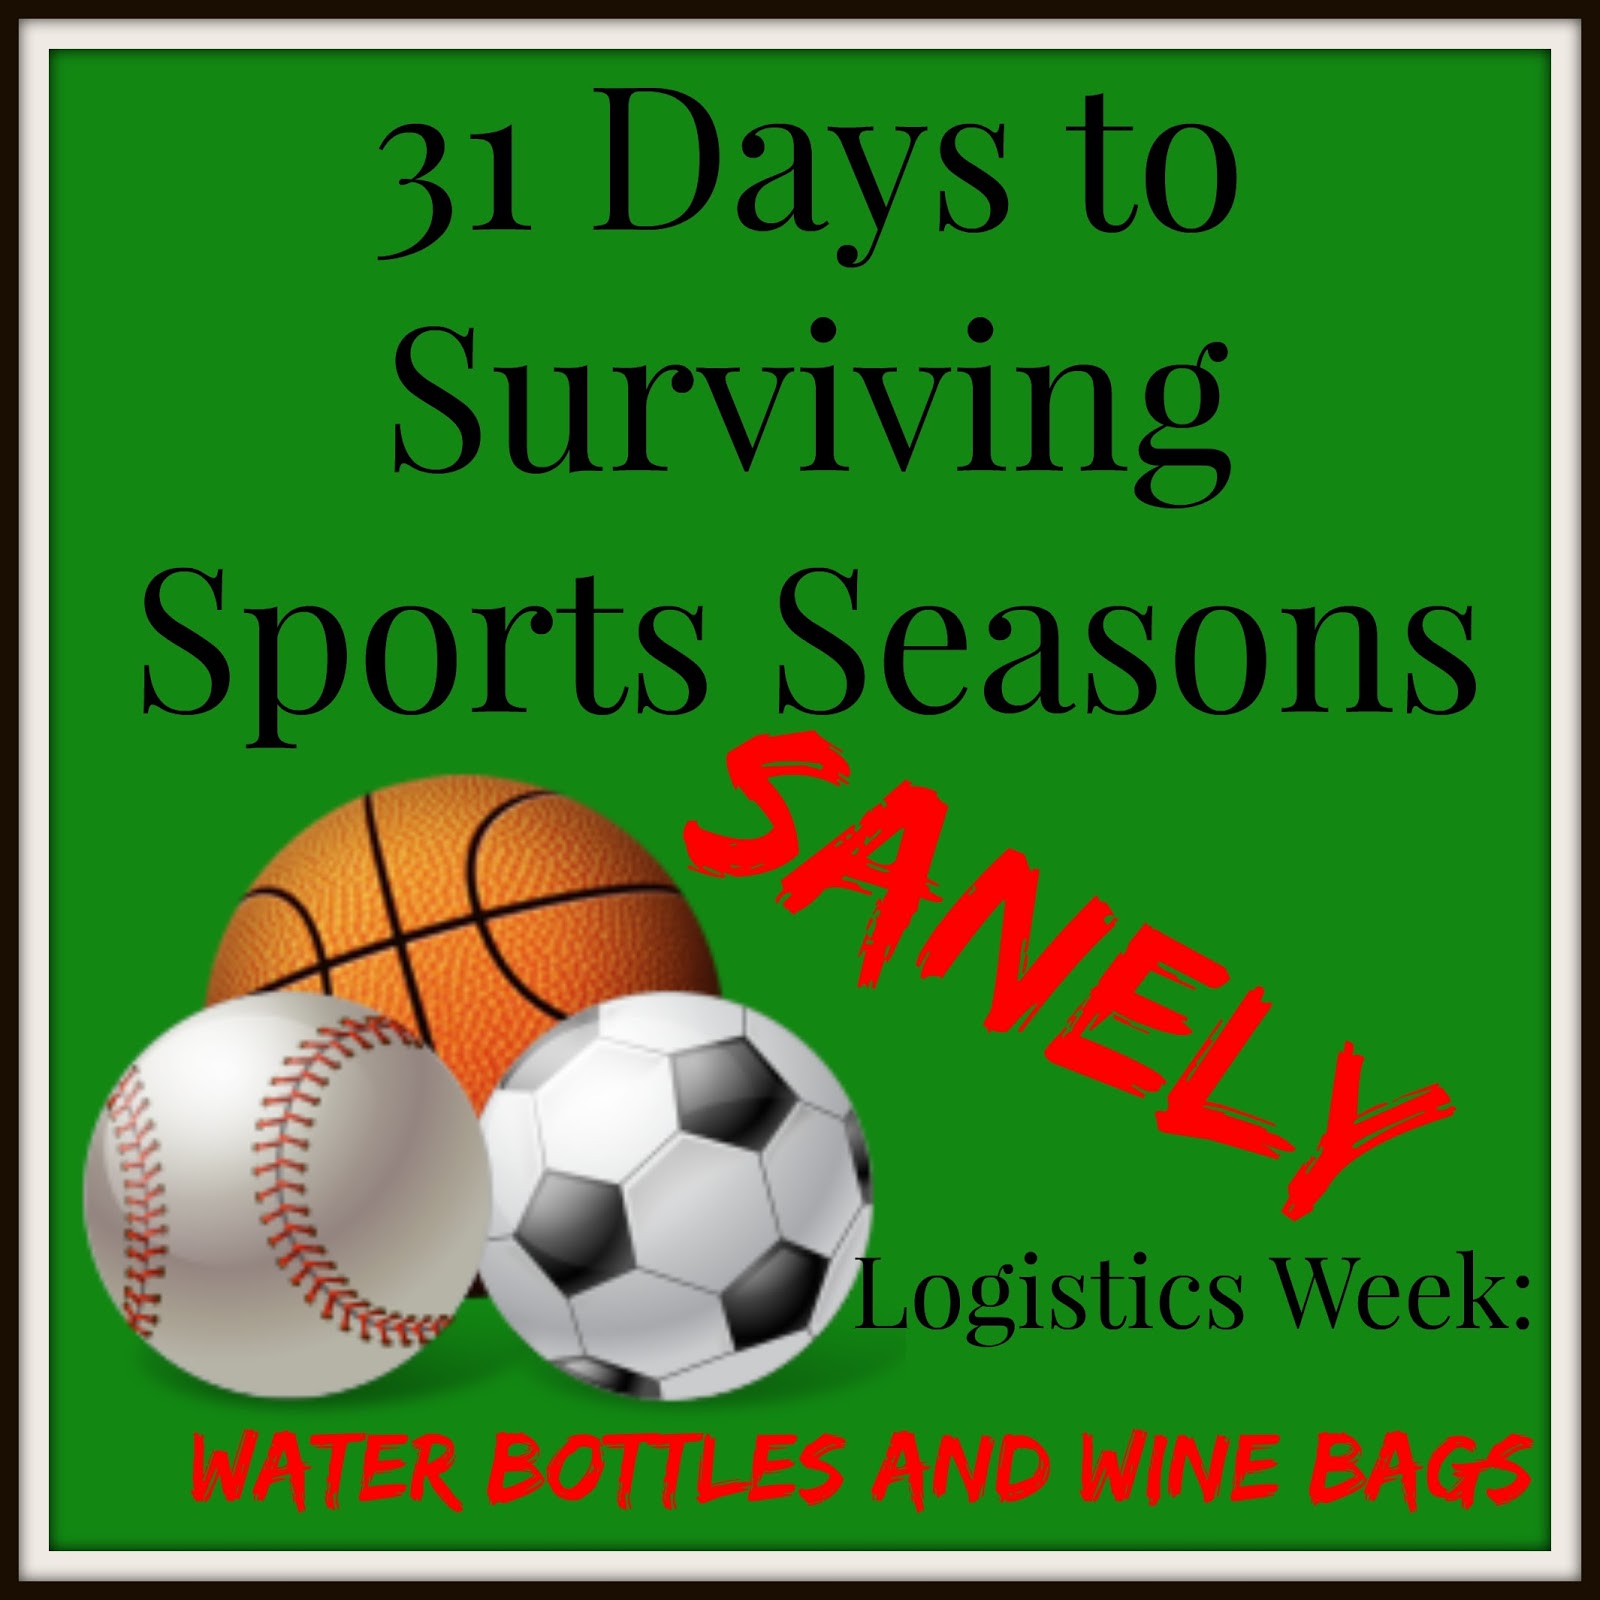 31 Days to Surviving Sports Seasons Sanely: Water Bottles & Wine Bags